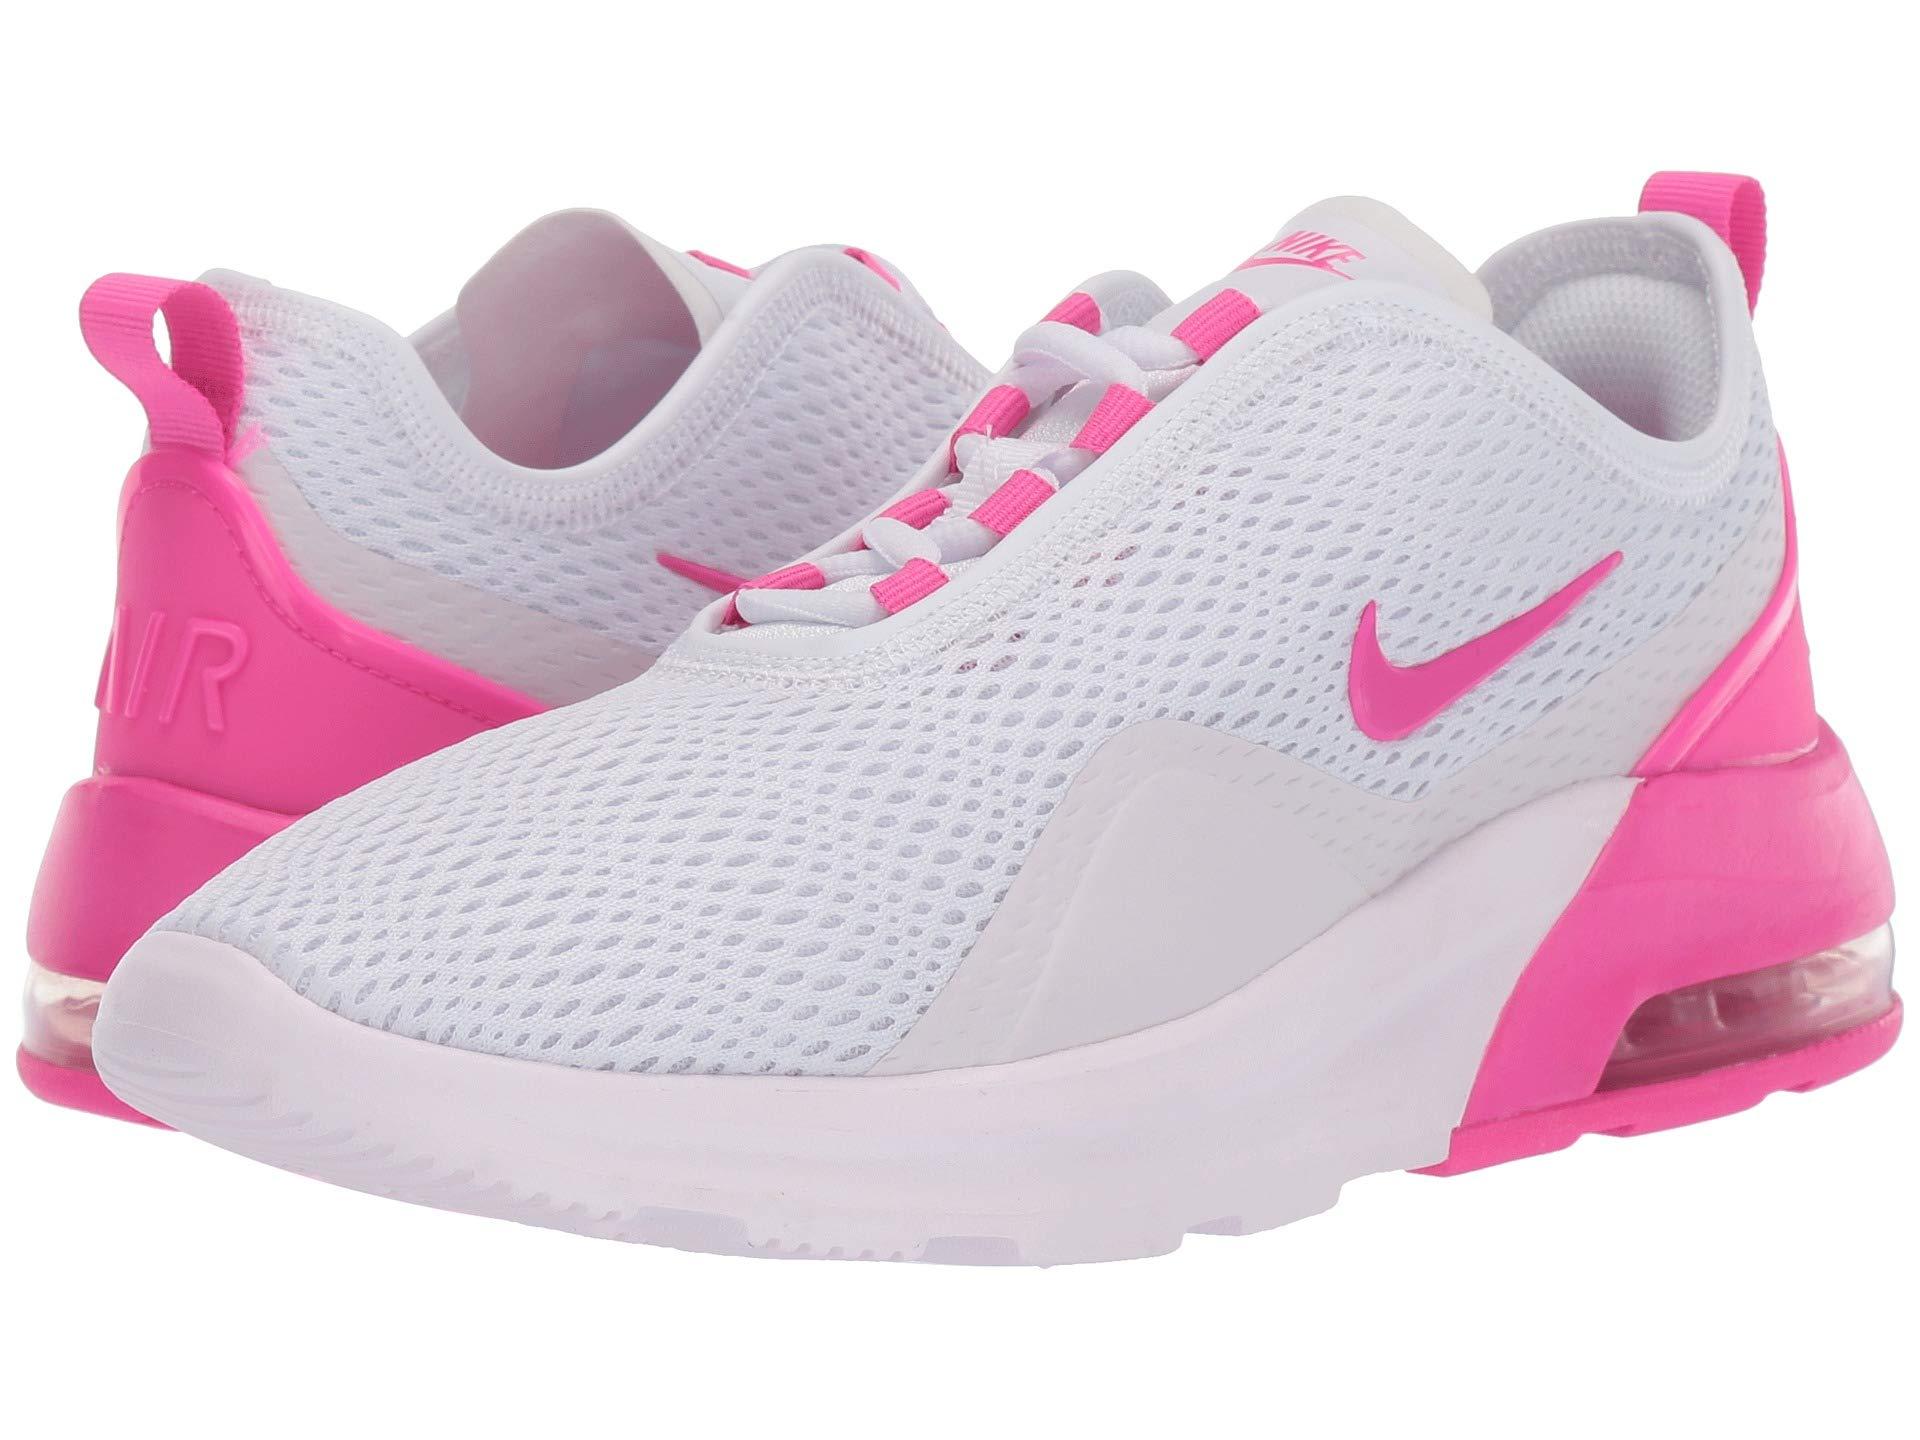 Nike Rubber Air Max Motion 2 Shoes in White/Pink (Pink) | Lyst